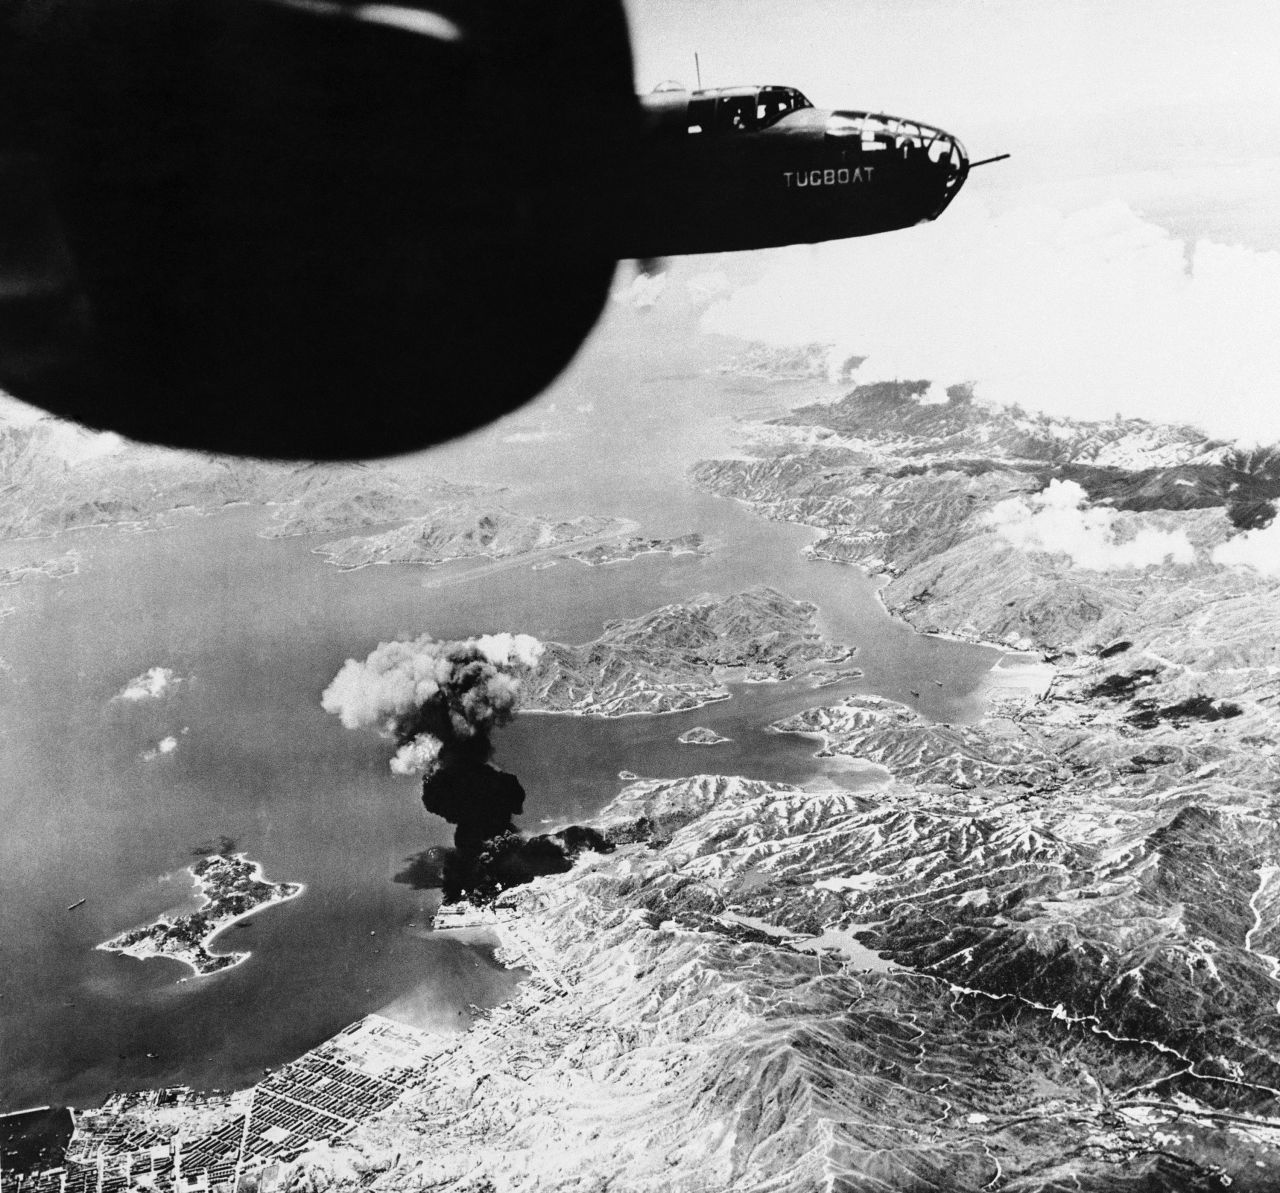 United States Air Force bombers set fire to a Japanese oil depot in the Lai Chi Kok neighborhood on October 19, 1943, sending smoke 15,000 feet high. Stonecutter's Island, pictured at left, once held a British ammunition dump. 